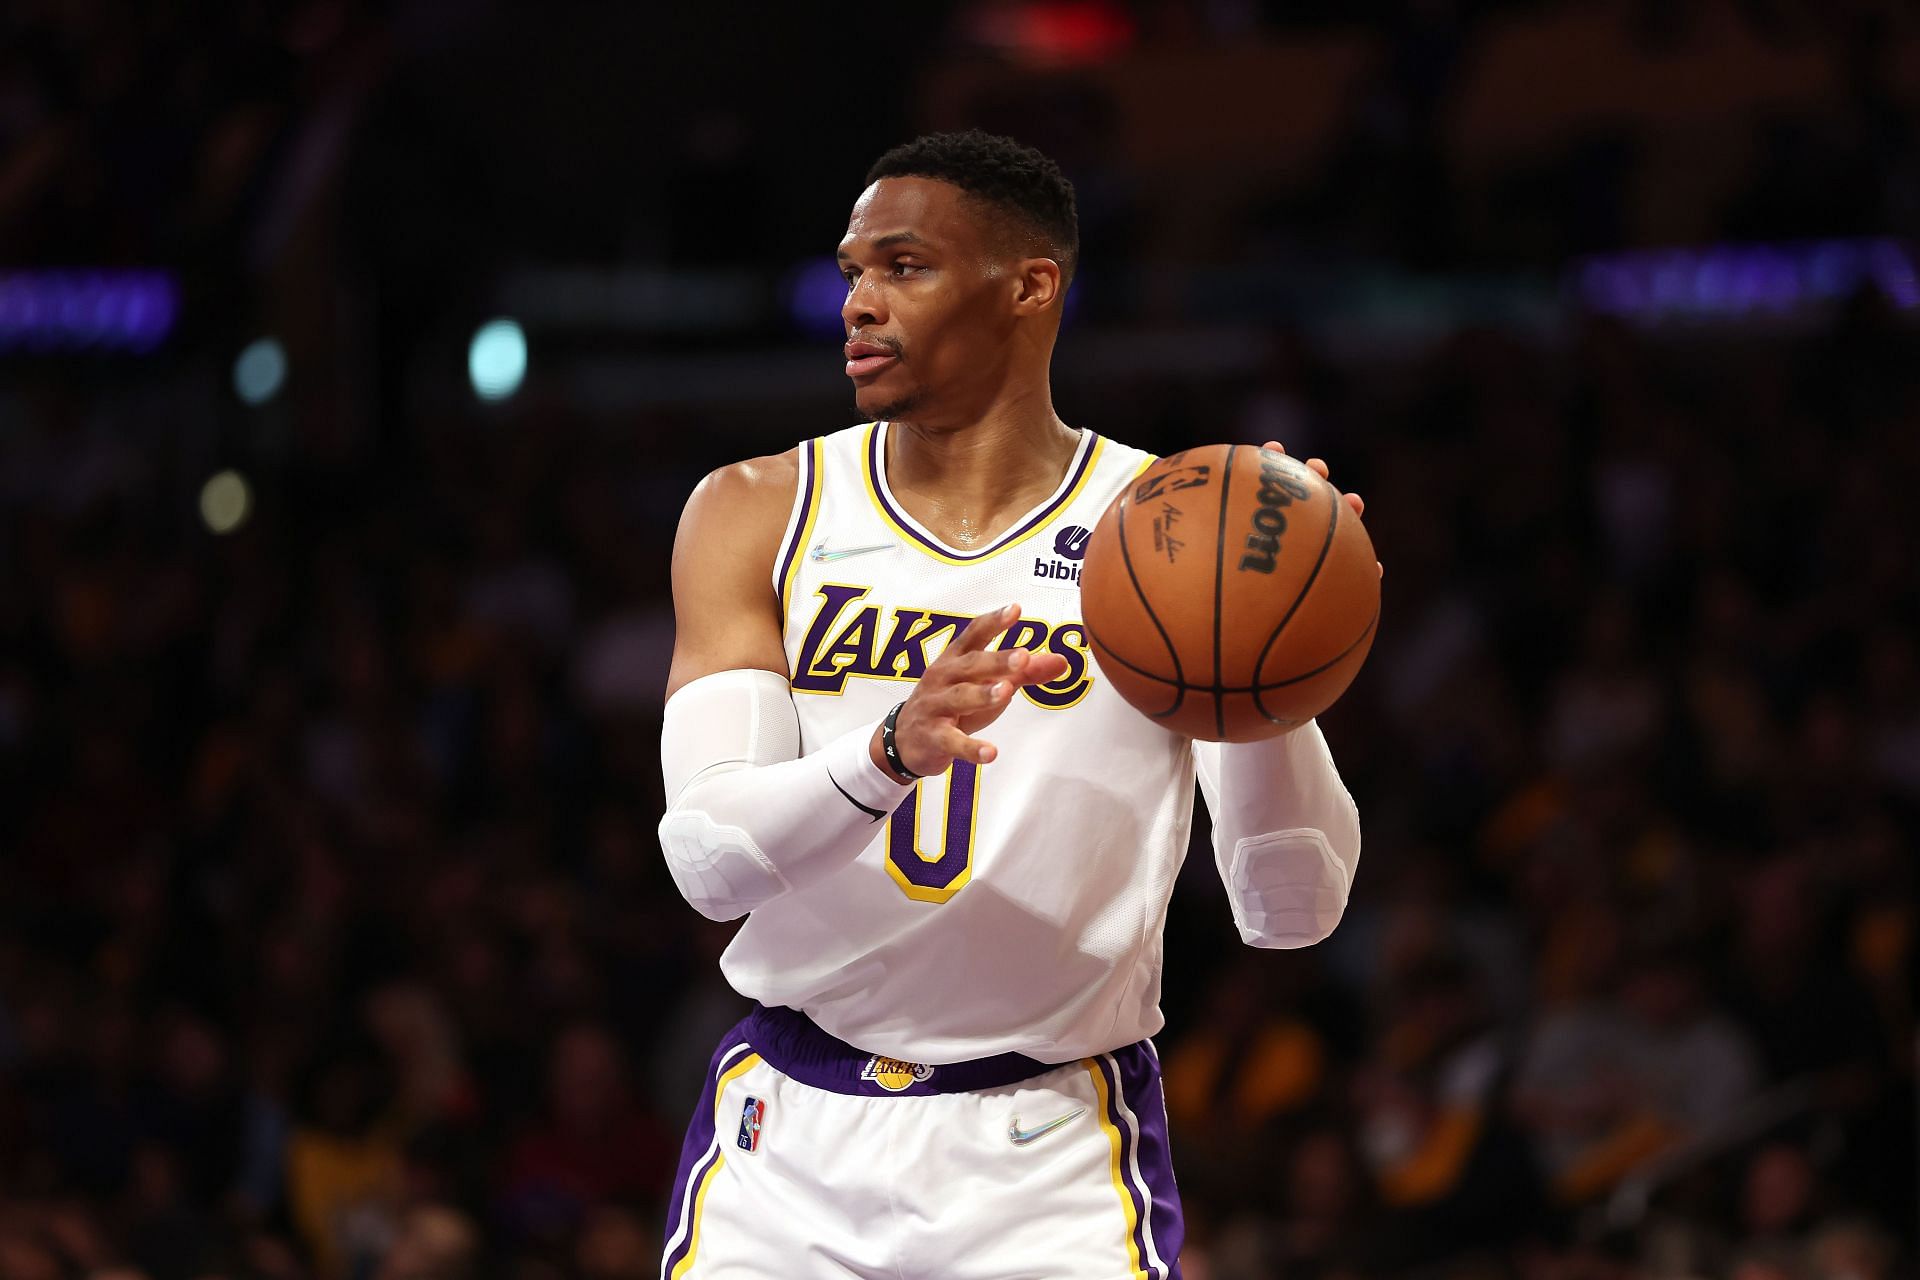 Russell Westbrook #0 of the Los Angeles Lakers looks on during the first half of a game against the Denver Nuggets at Crypto.com Arena on April 03, 2022 in Los Angeles, California.